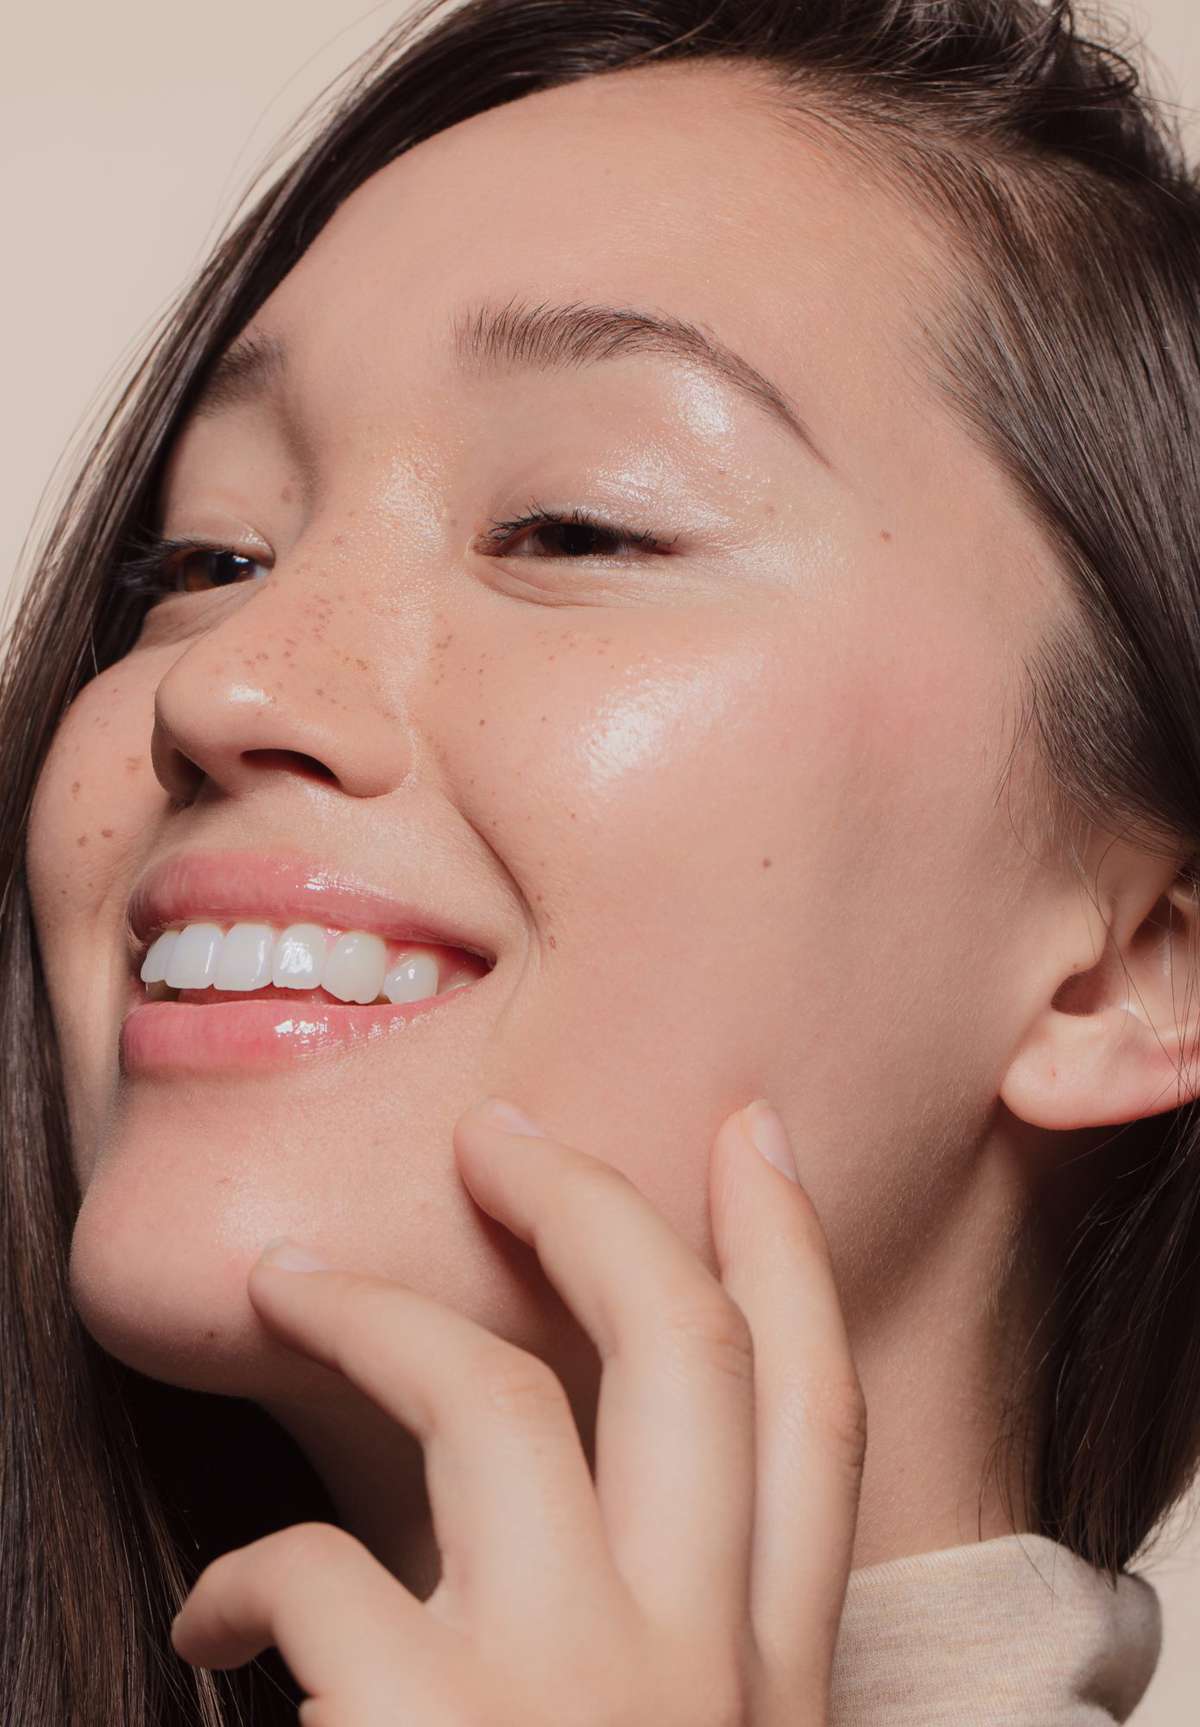 This Resurfacing Serum Leaves Wrinkles "Practically Gone," According to Fans